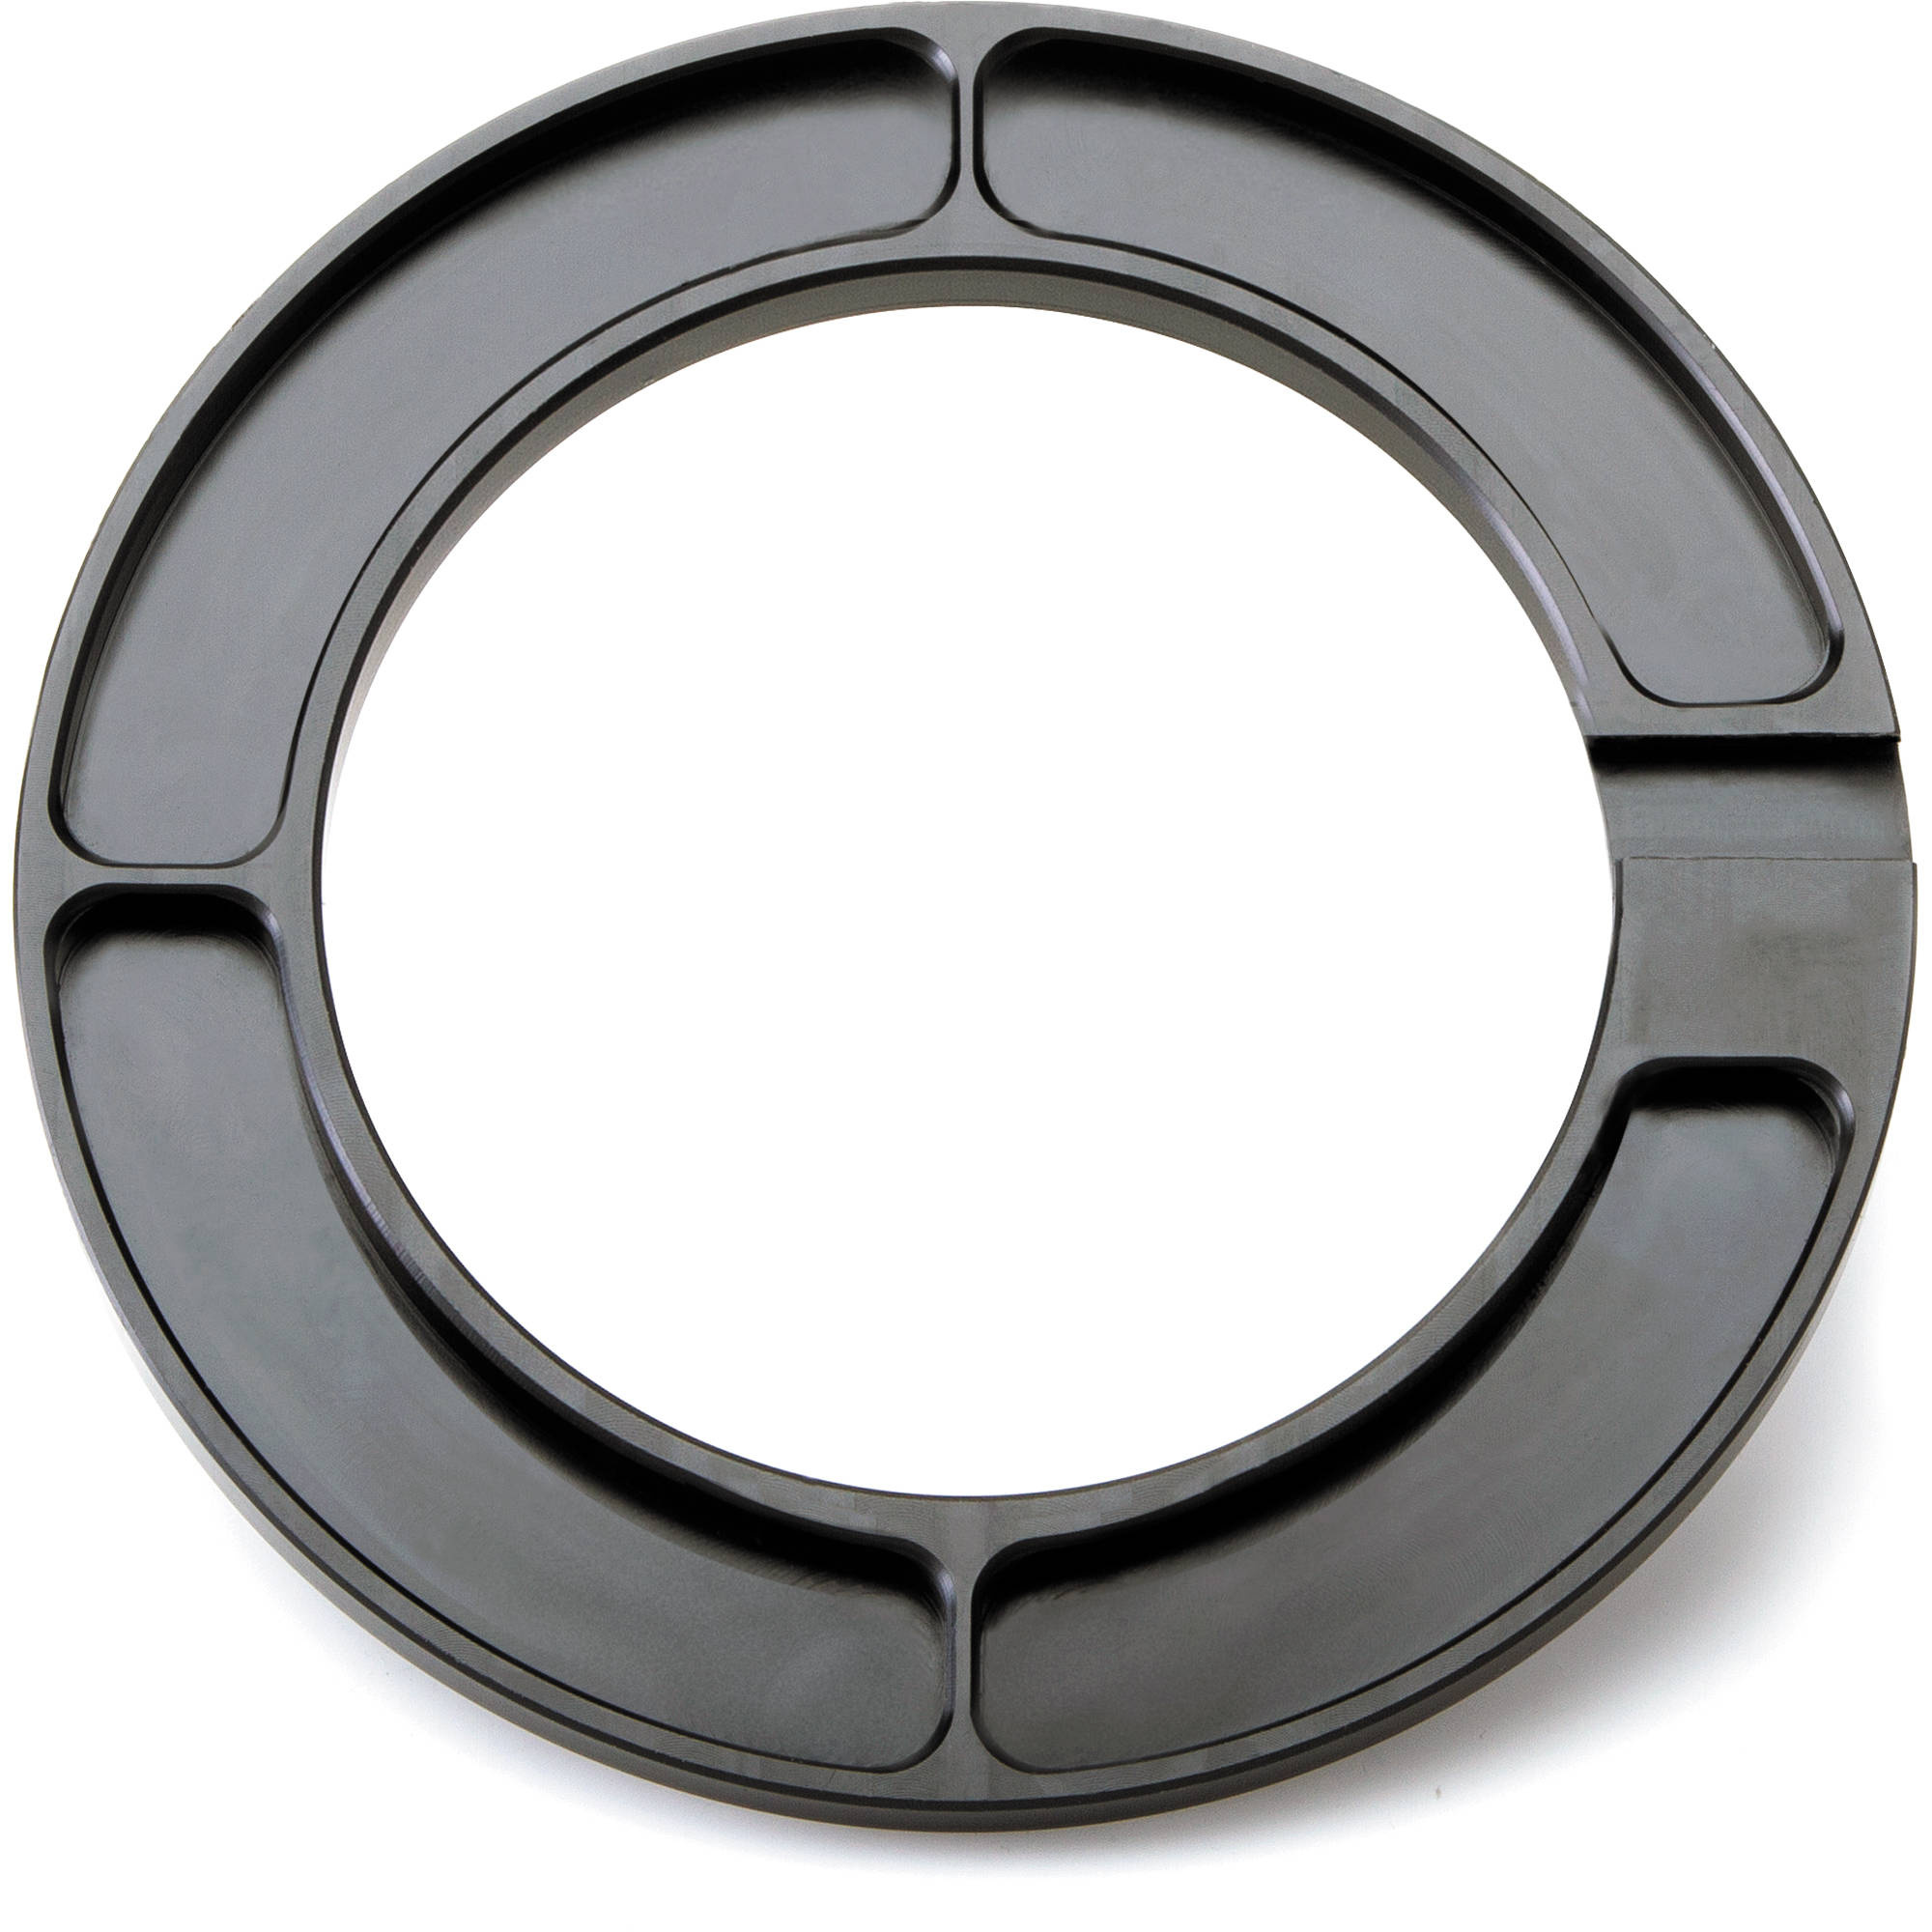 Redrock Micro 114mm Lens Adapter for the microMatteBox Clamp-On Adapter